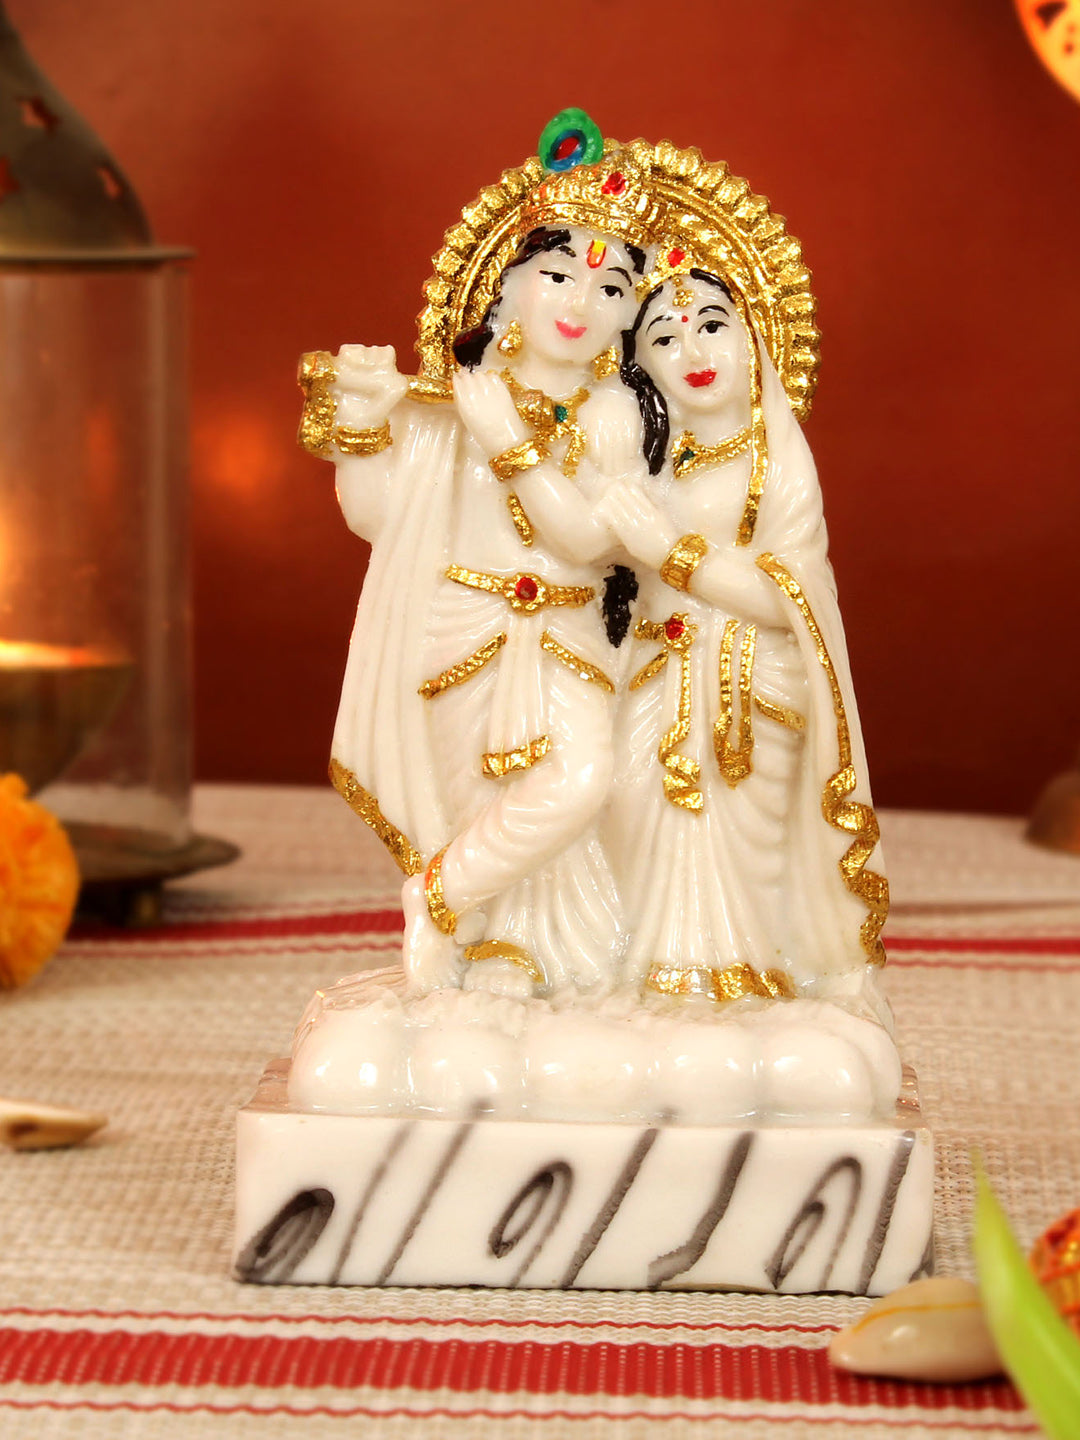 Buy Krishnagallery1 Entique Radha Krishan Statue Murti Marble Online at Low  Prices in India - Paytmmall.com